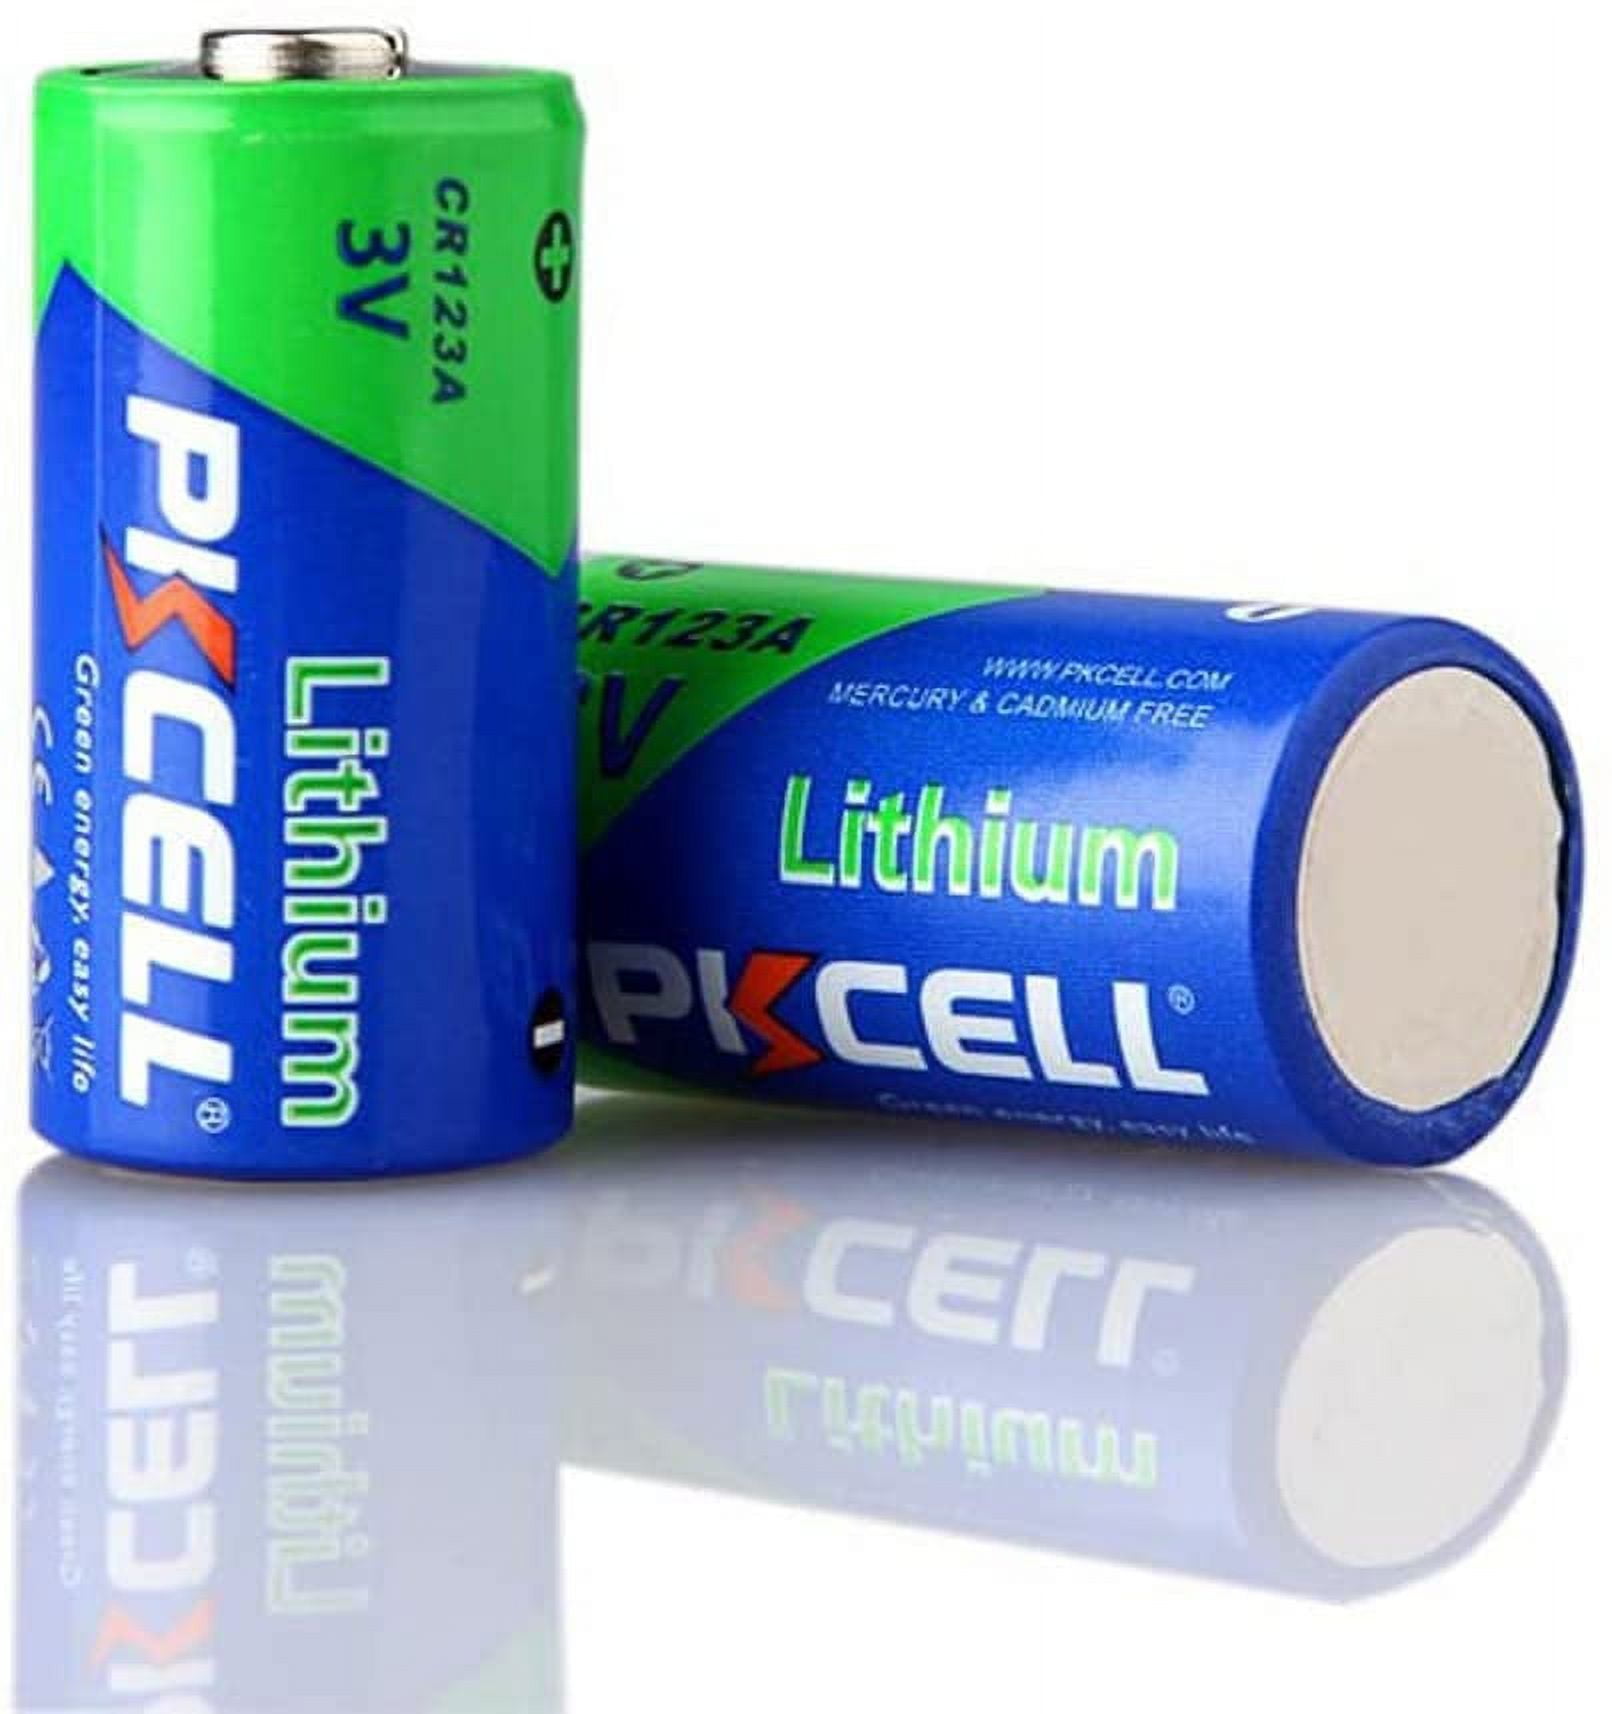 PKCELL 3V Hi-Energy Lithium CR123A Battery - The Home Security Superstore